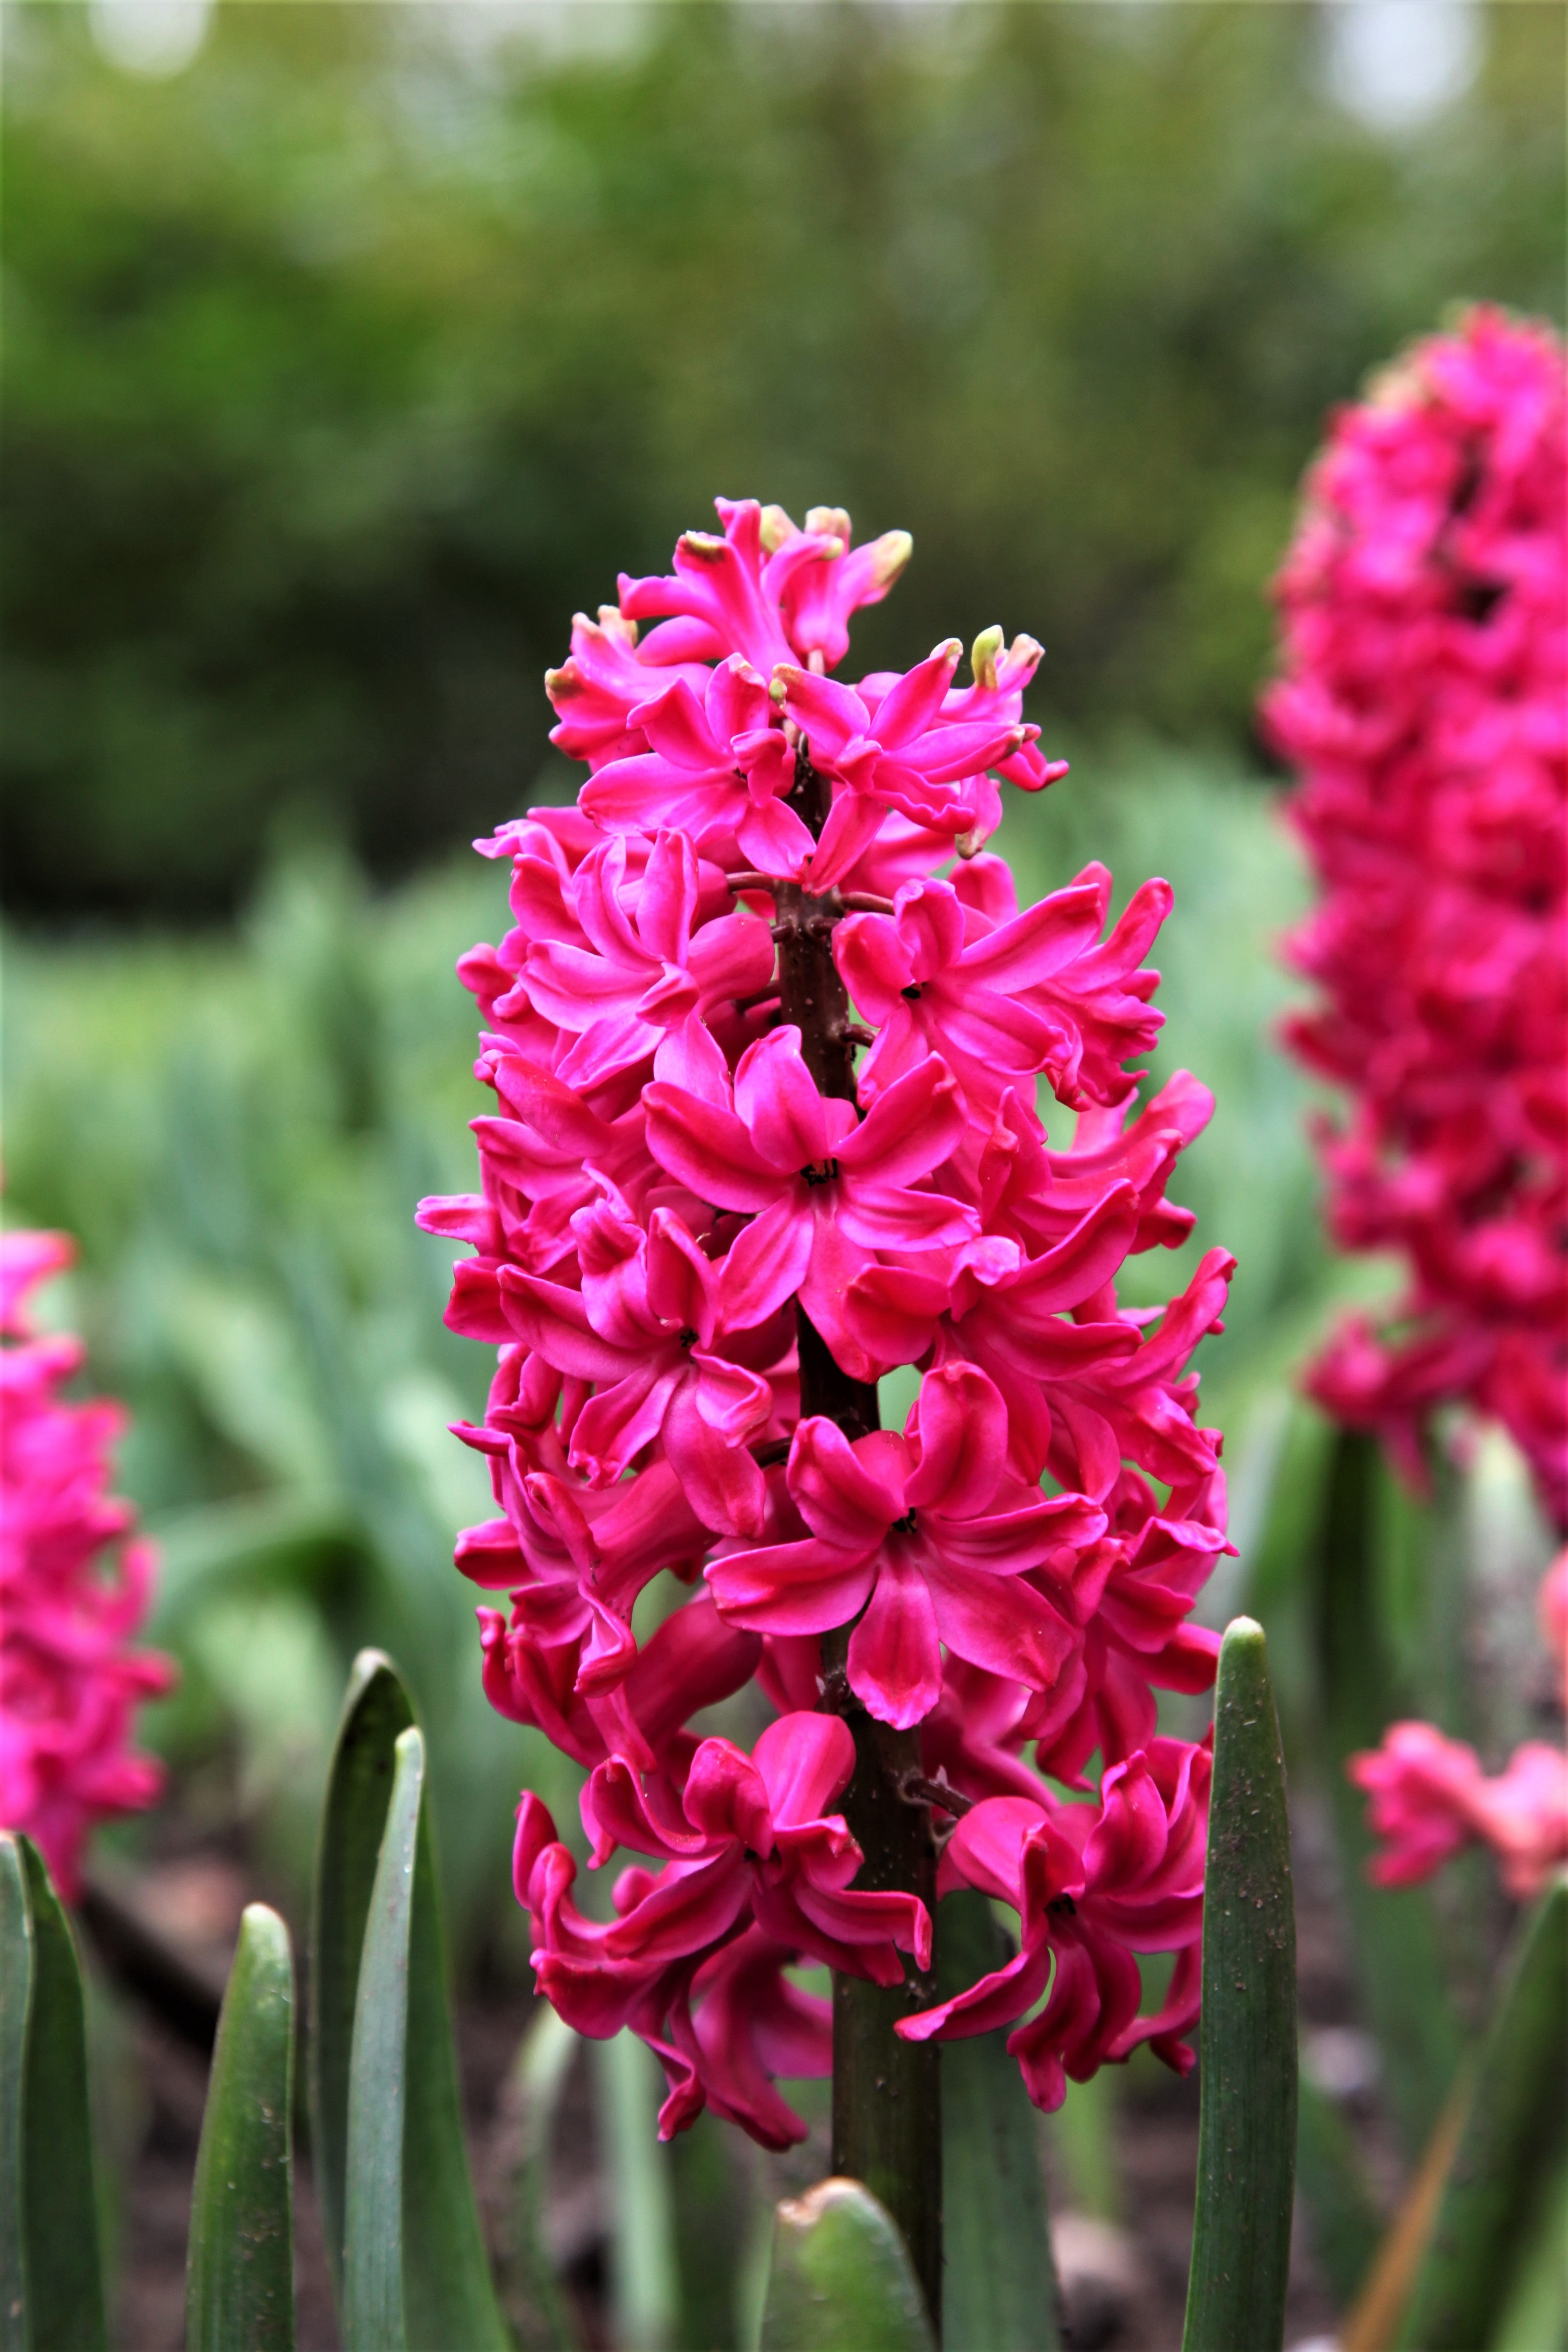 Beautiful pink hyacinth Jan bos, with little florets and green foliage